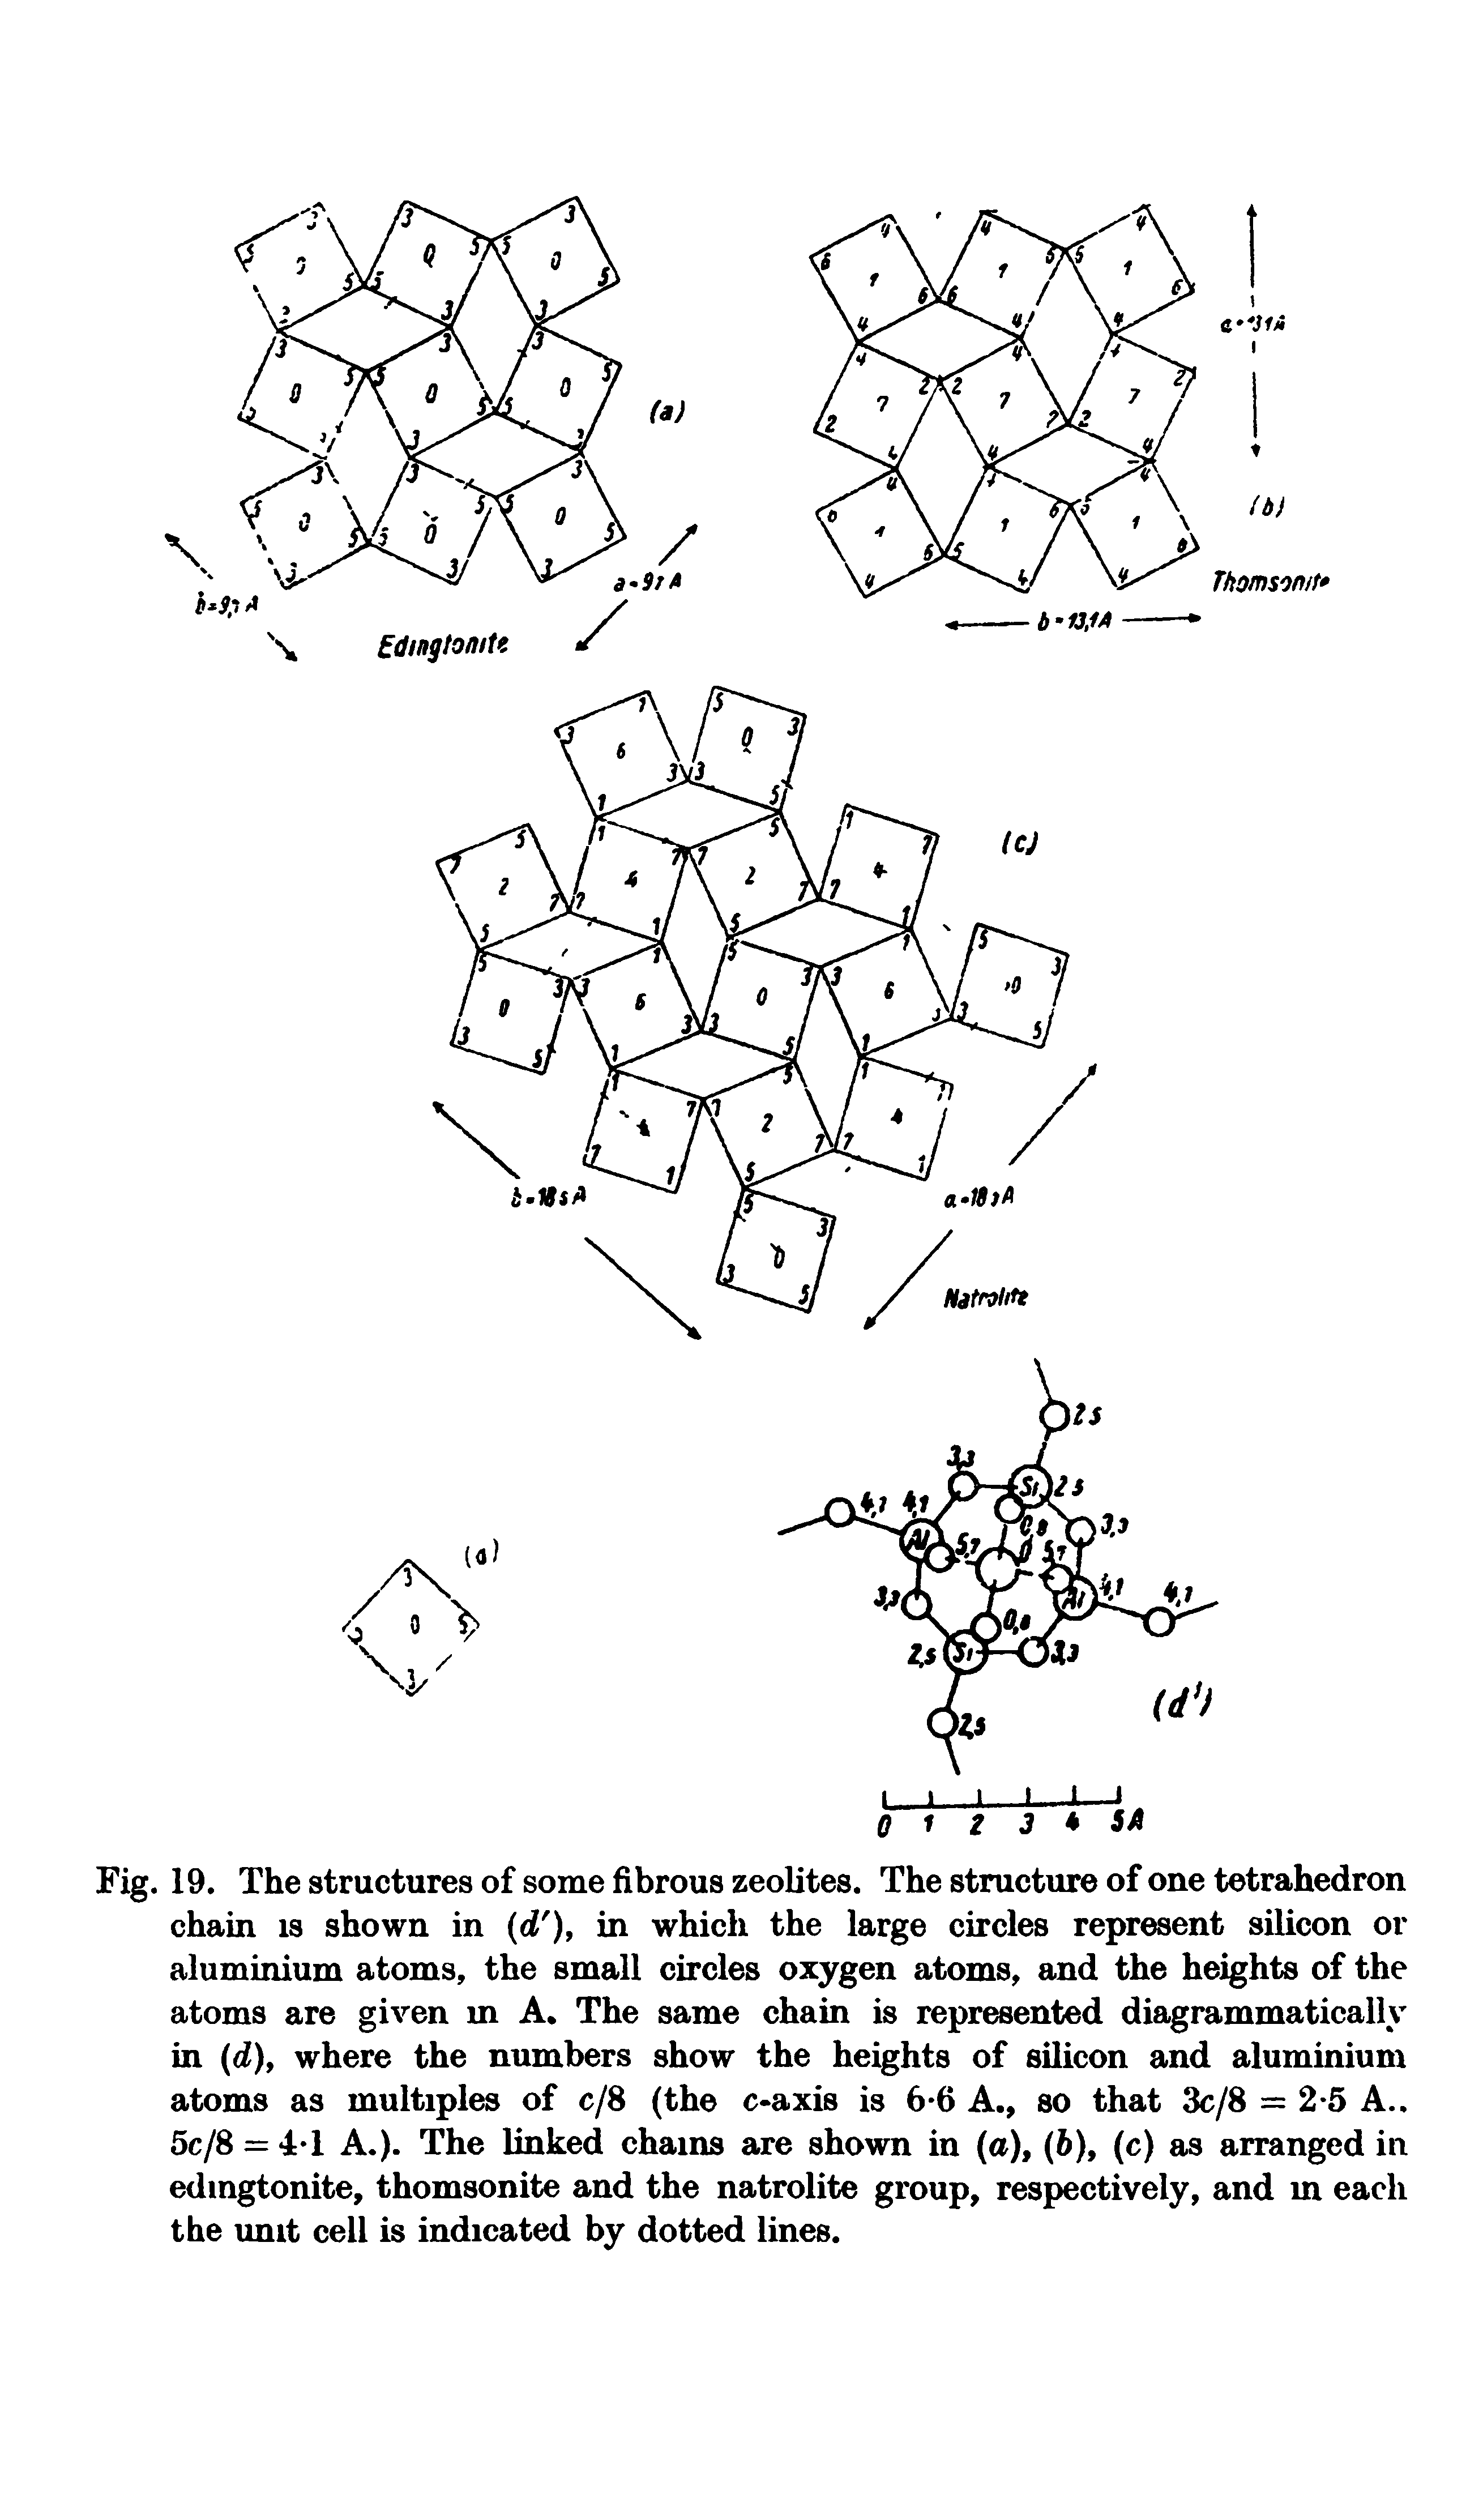 Fig. 19. The structures of some fibrous zeolites. The structure of one tetrahedron chain is shown in (d ), in which the large circles represent silicon or aluminium atoms, the small circles oxygen atoms, and the heights of the atoms are given m A The same chain is represented diagrammatically in (d), where the numbers show the heights of silicon and aluminium atoms as multiples of c/8 (the c axis is 6 6 A., so that 3c/8 = 2 5 A.. 5c/8 = 4 1 A.). The linked chains are shown in (a), (6), (c) as arranged in edingtonite, thomsonite and the natrolite group, respectively, and m each the imit cell is indicated by dotted lines.